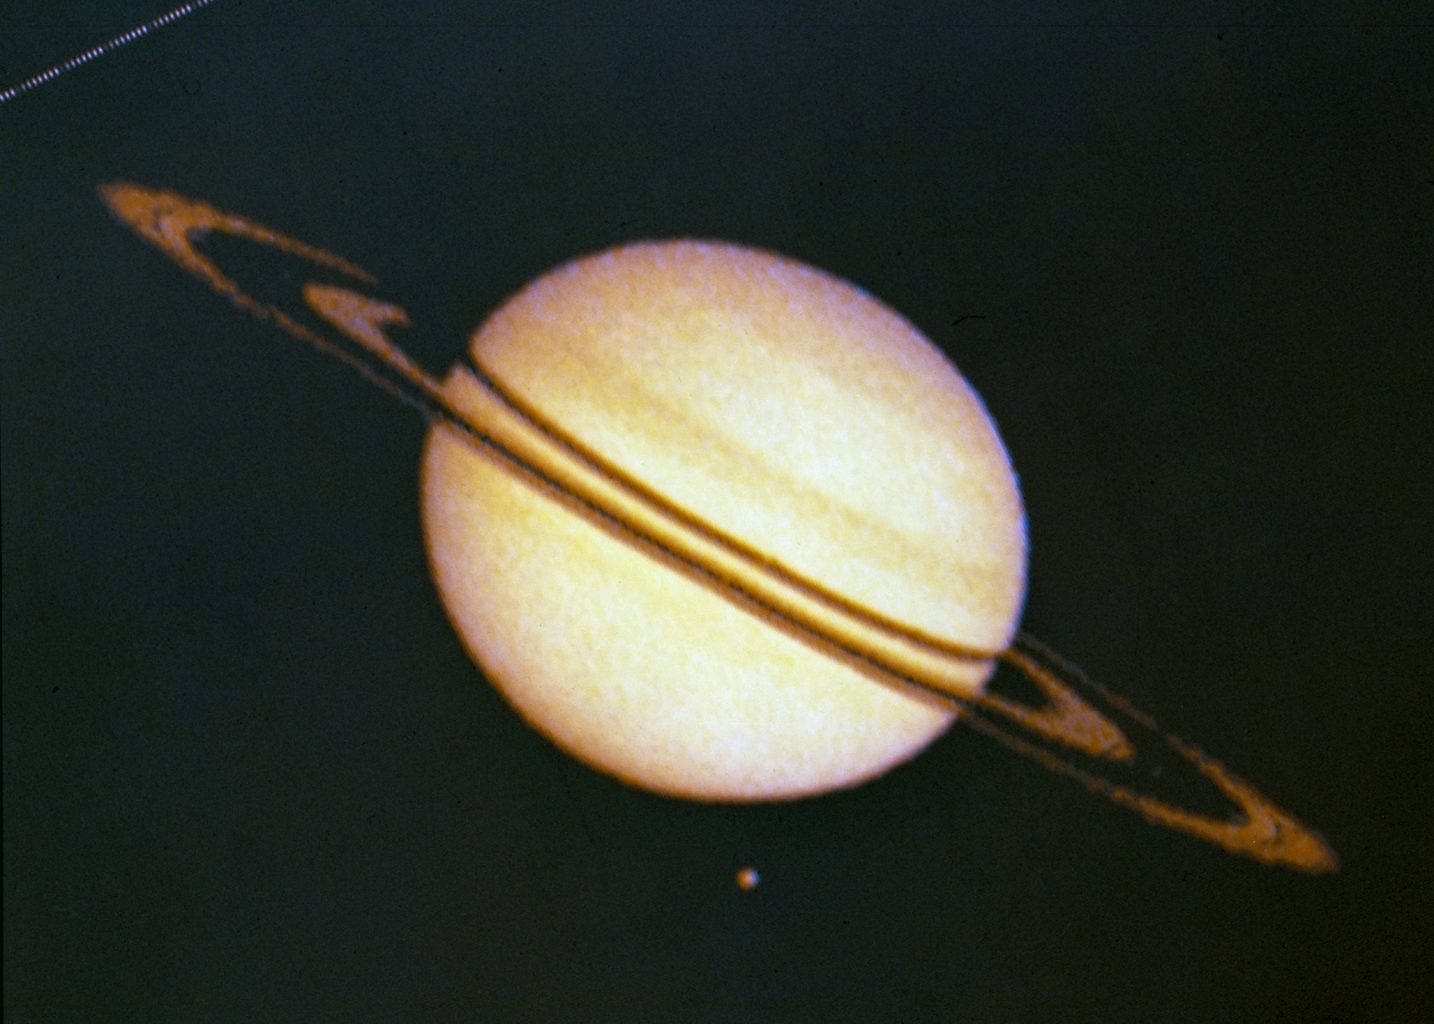 Saturn and Titan captured by the Pioneer 11 spacecraft in 1979. Credit: NASA